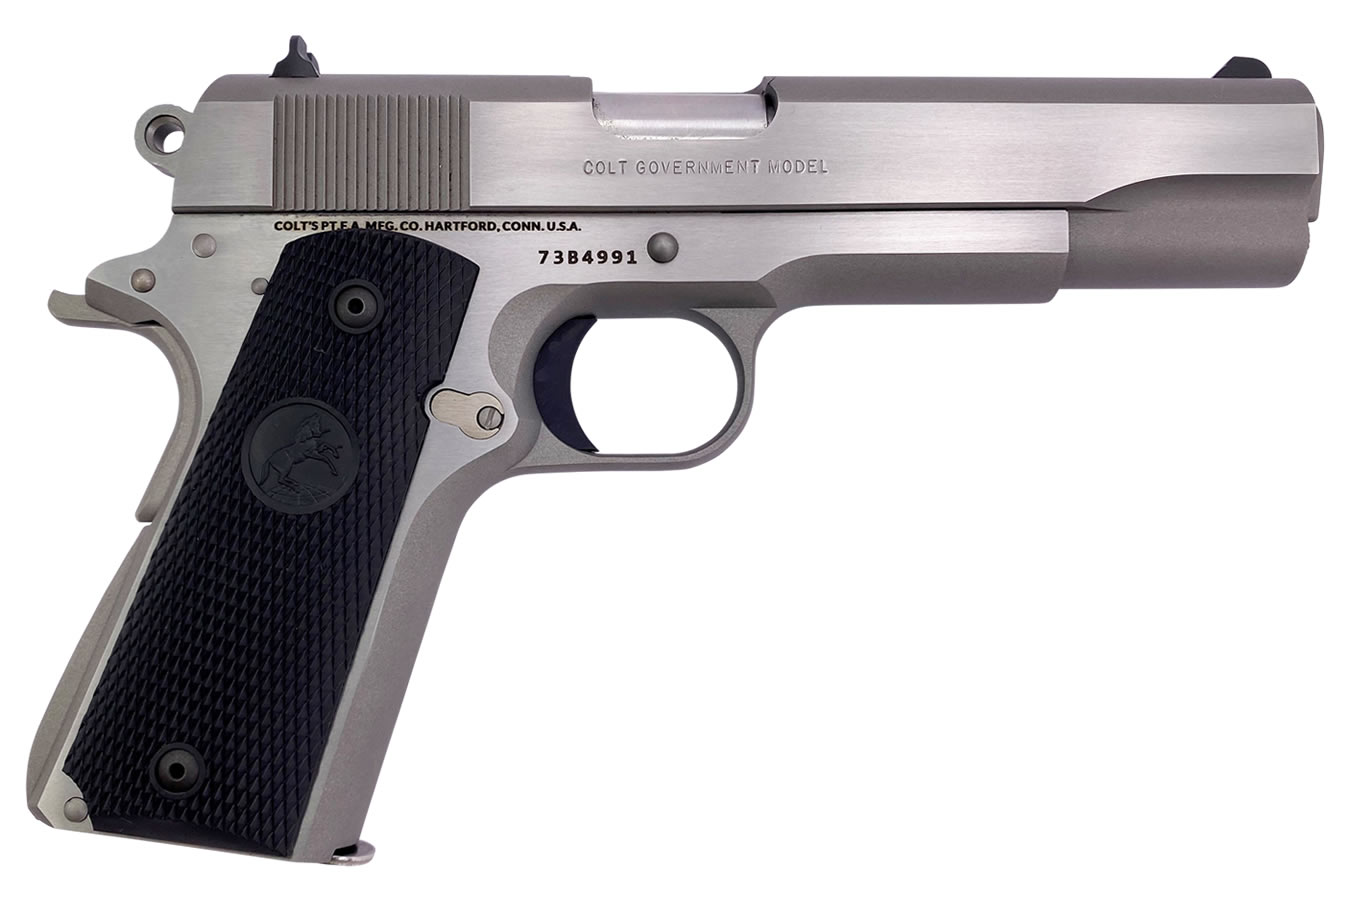 COLT 1911 GOVERNMENT 45 ACP FULL-SIZE PISTOL WITH BRUSHED STAINLESS FINISH